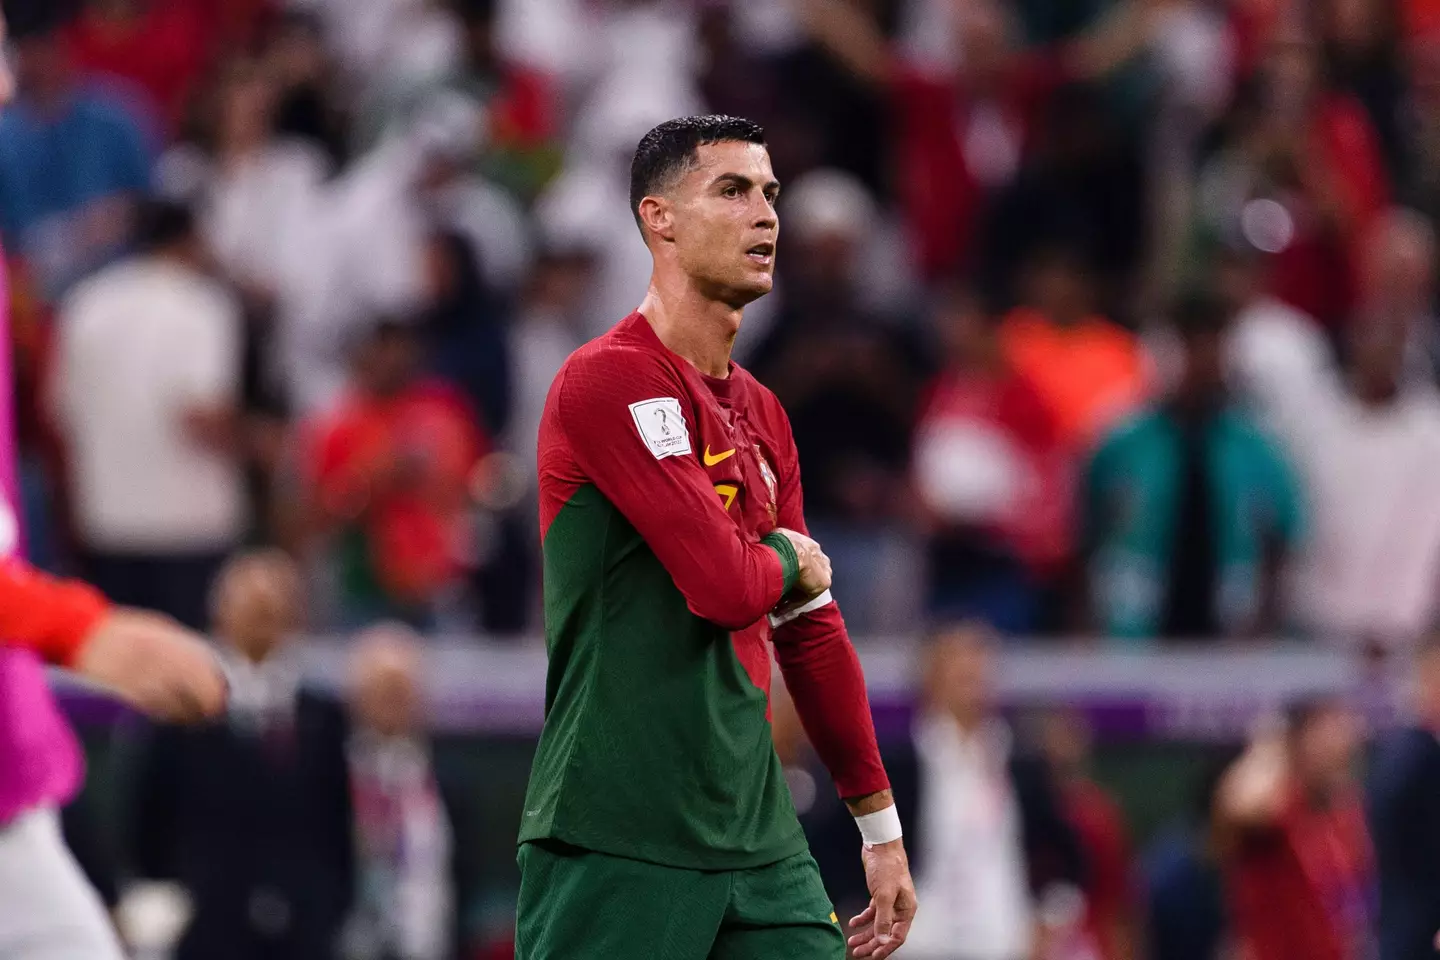 Ronaldo at the World Cup with Portugal. (Image